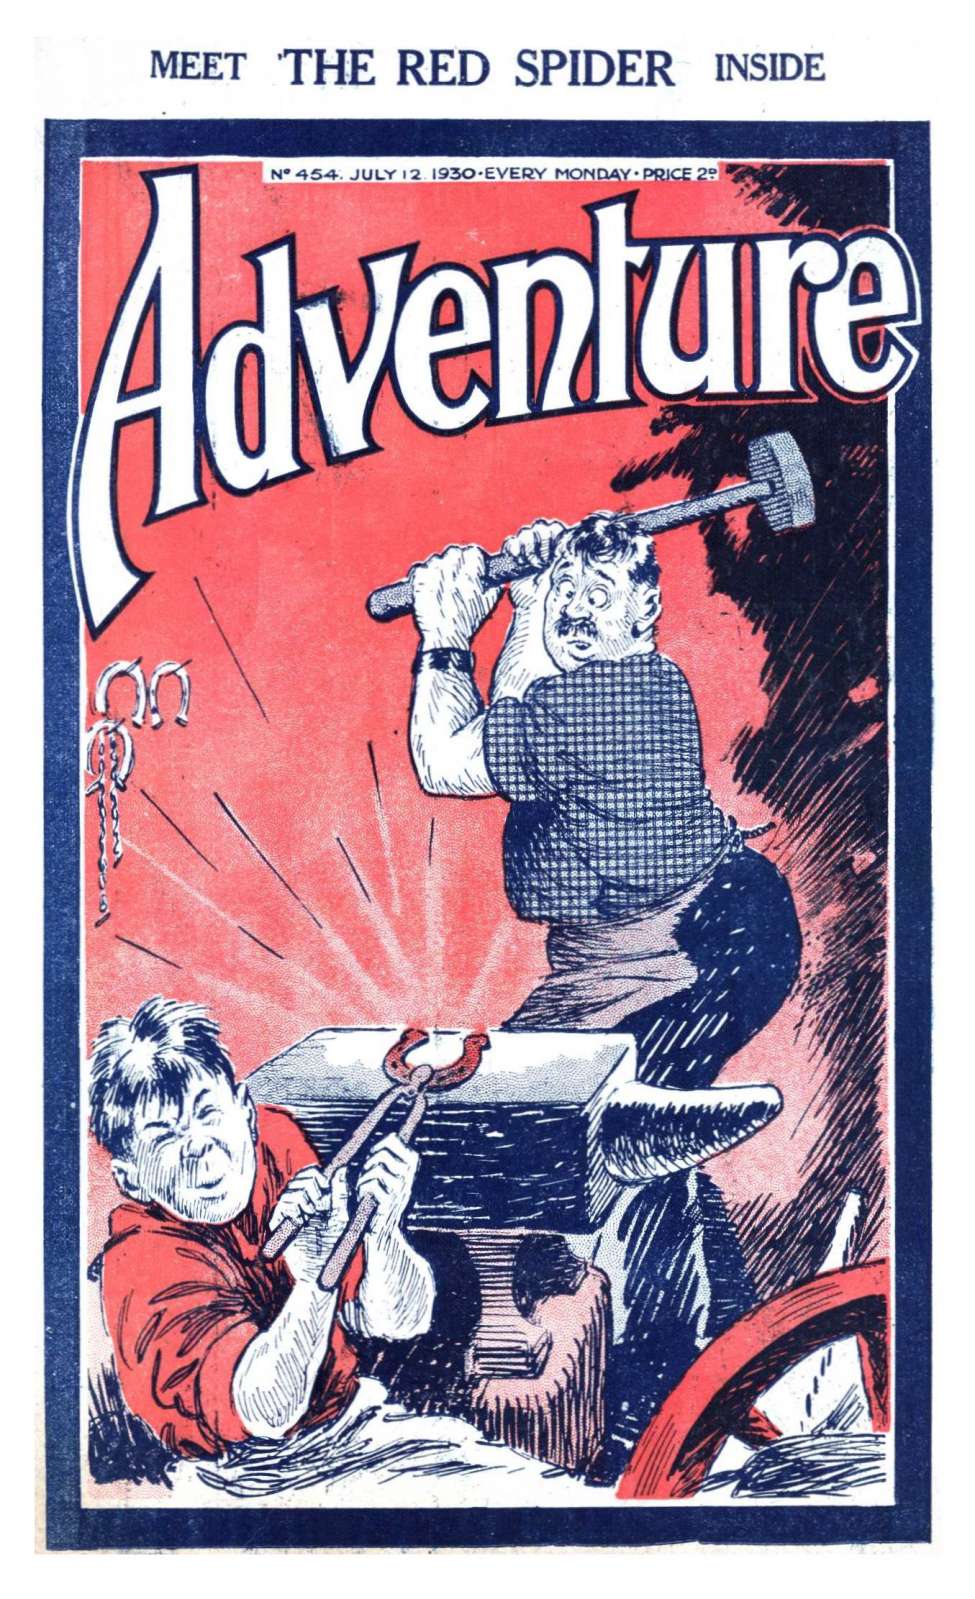 Book Cover For Adventure 454 - The Red Spider